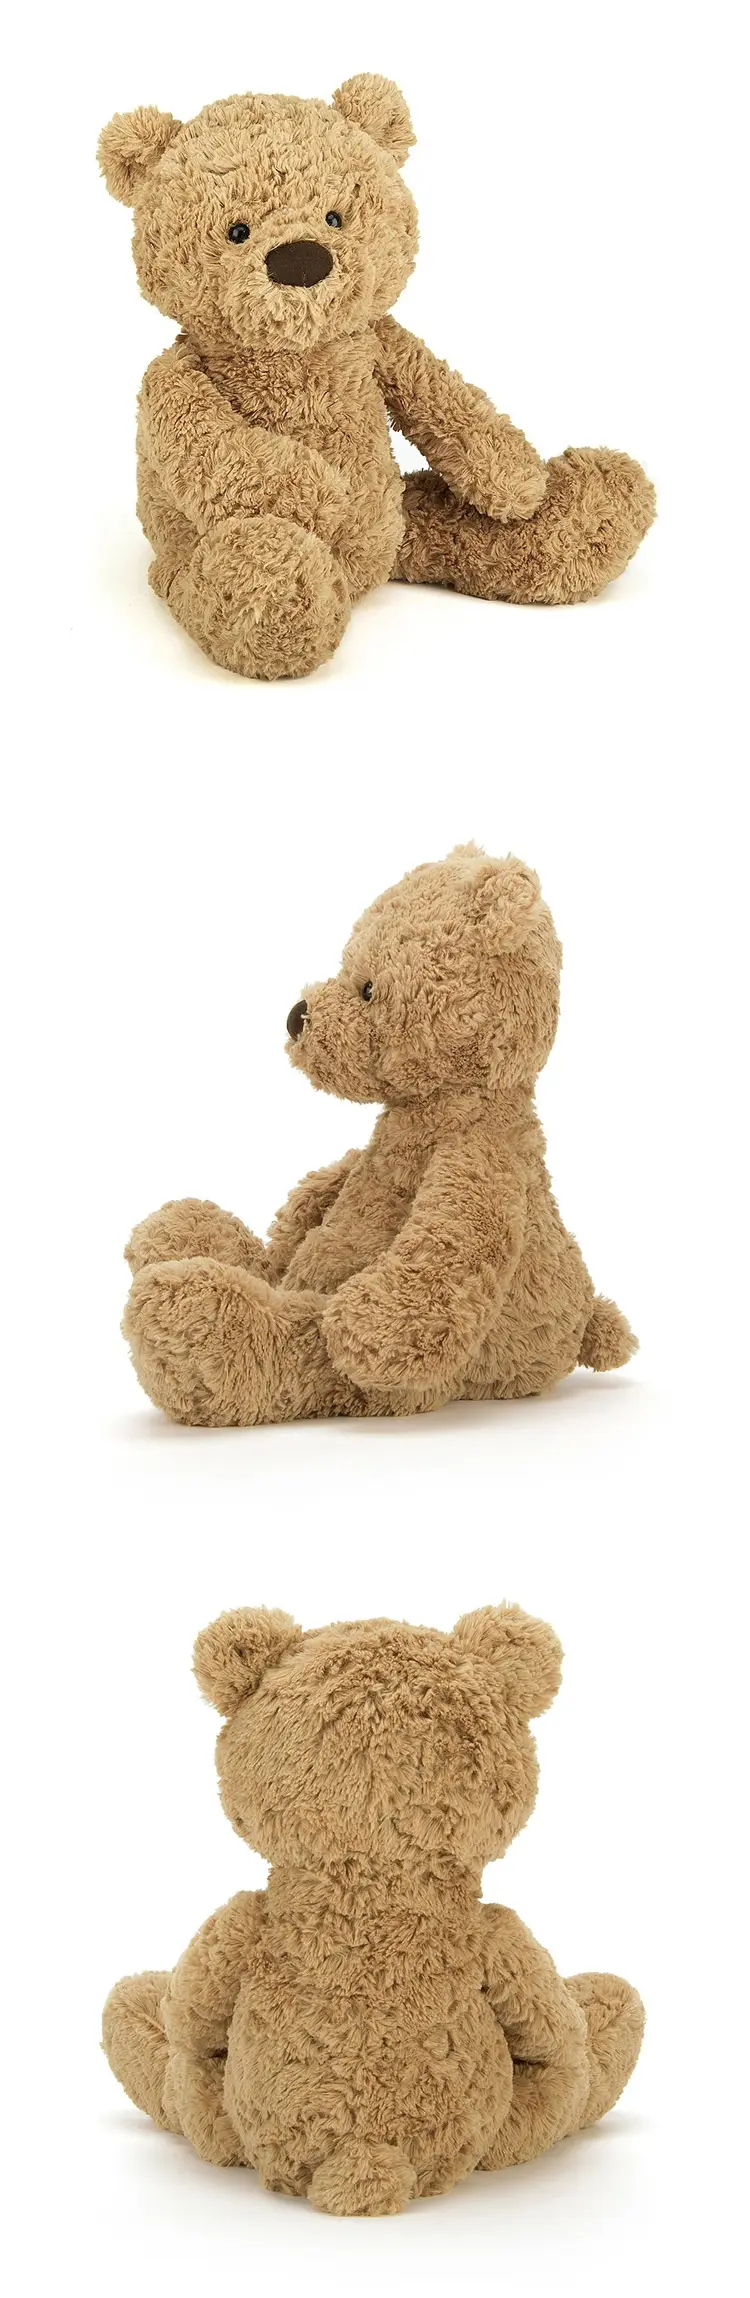 JellyCat Bumbly Bear 笨笨熊公仔